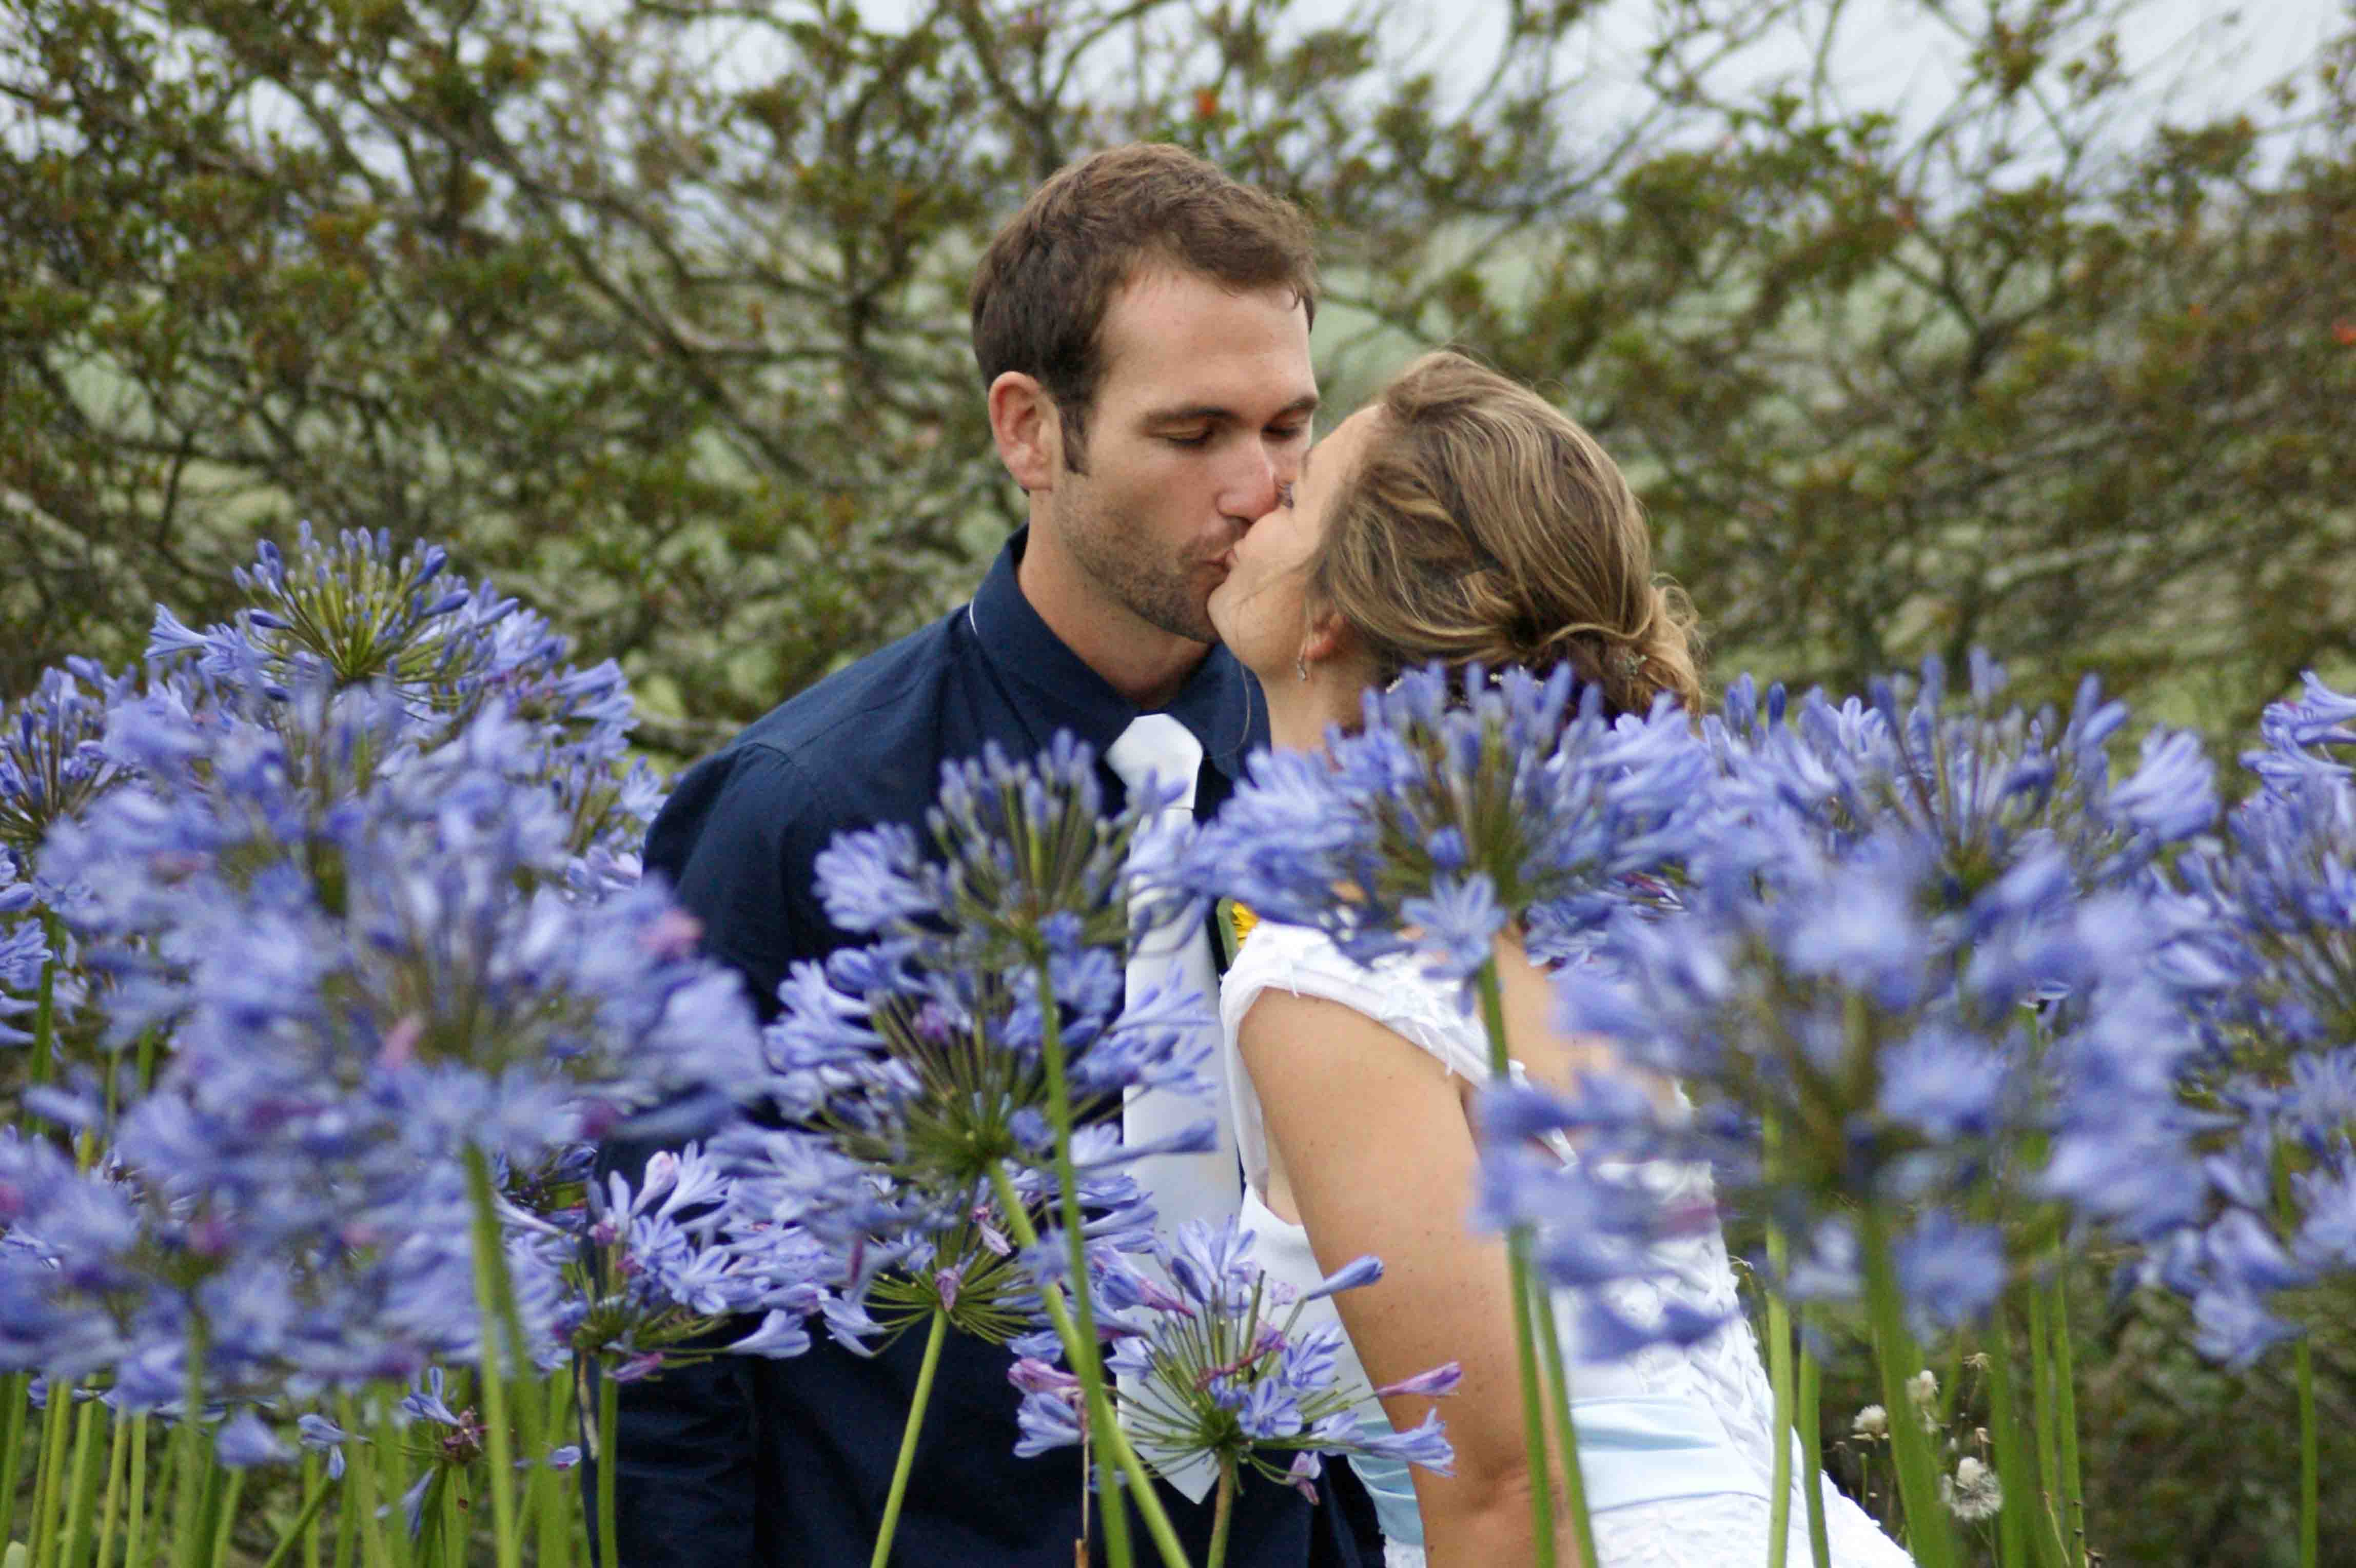 Justin and Tammy kissing in the Agapanthas